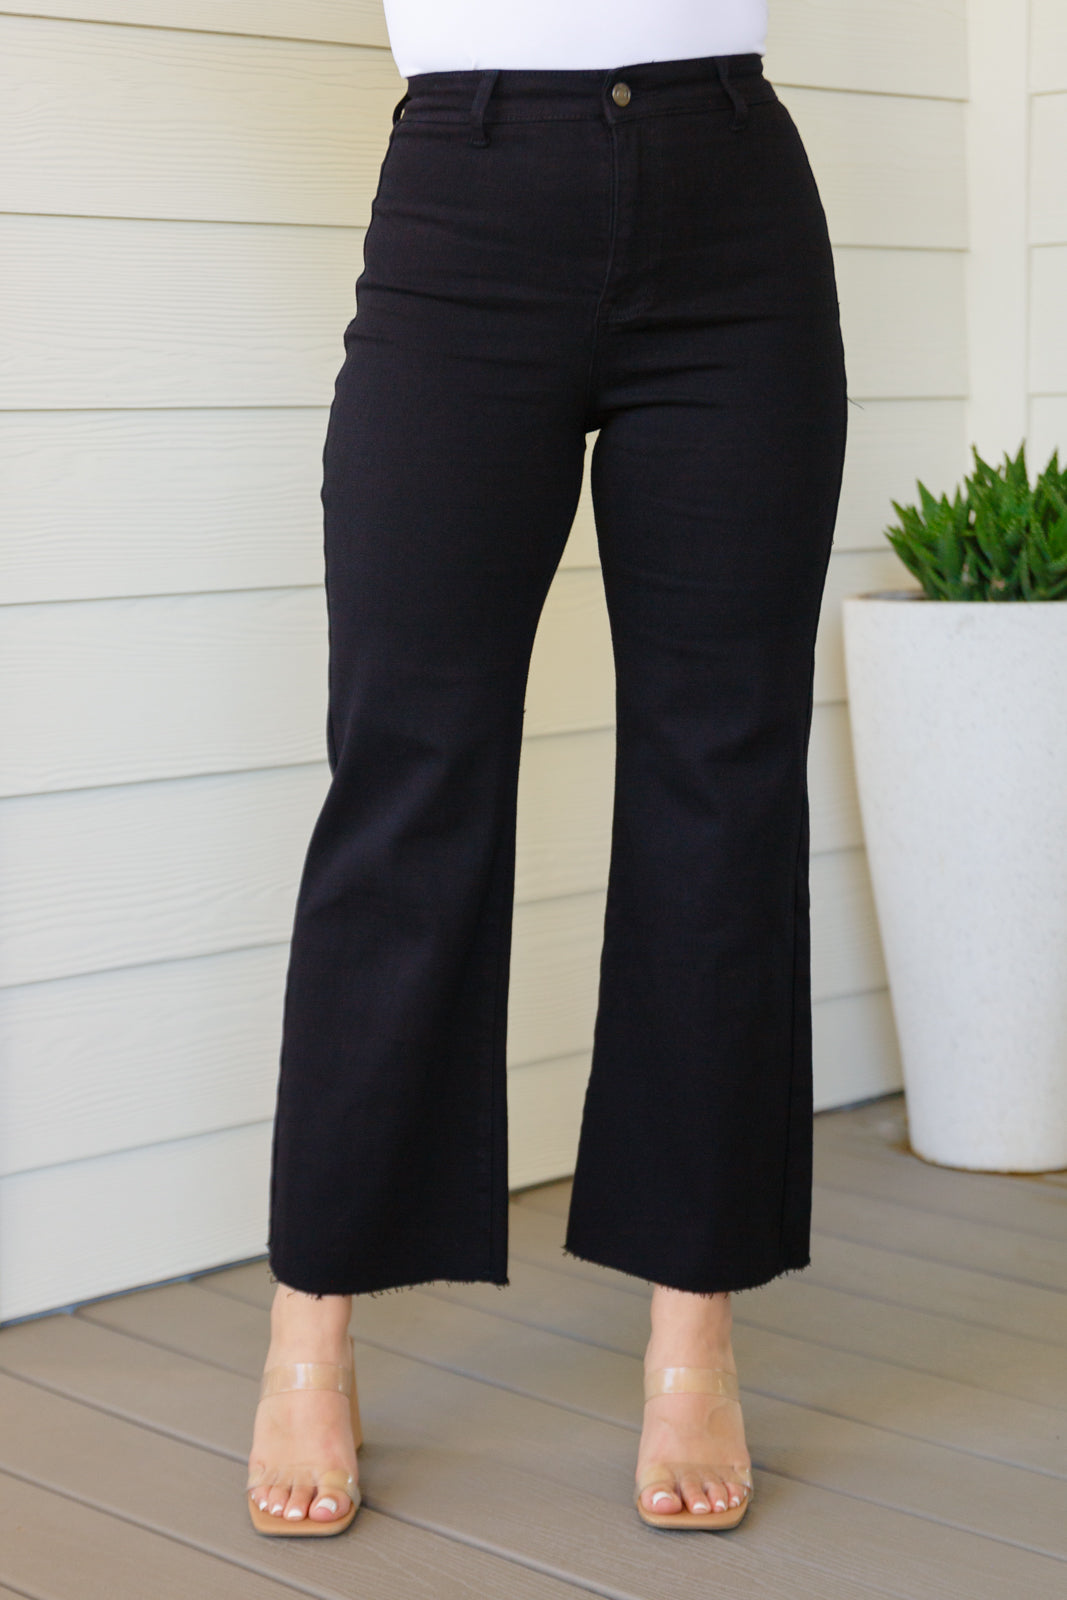 August High Rise Wide Leg Crop Jeans in Black - WEBSITE EXCLUSIVE